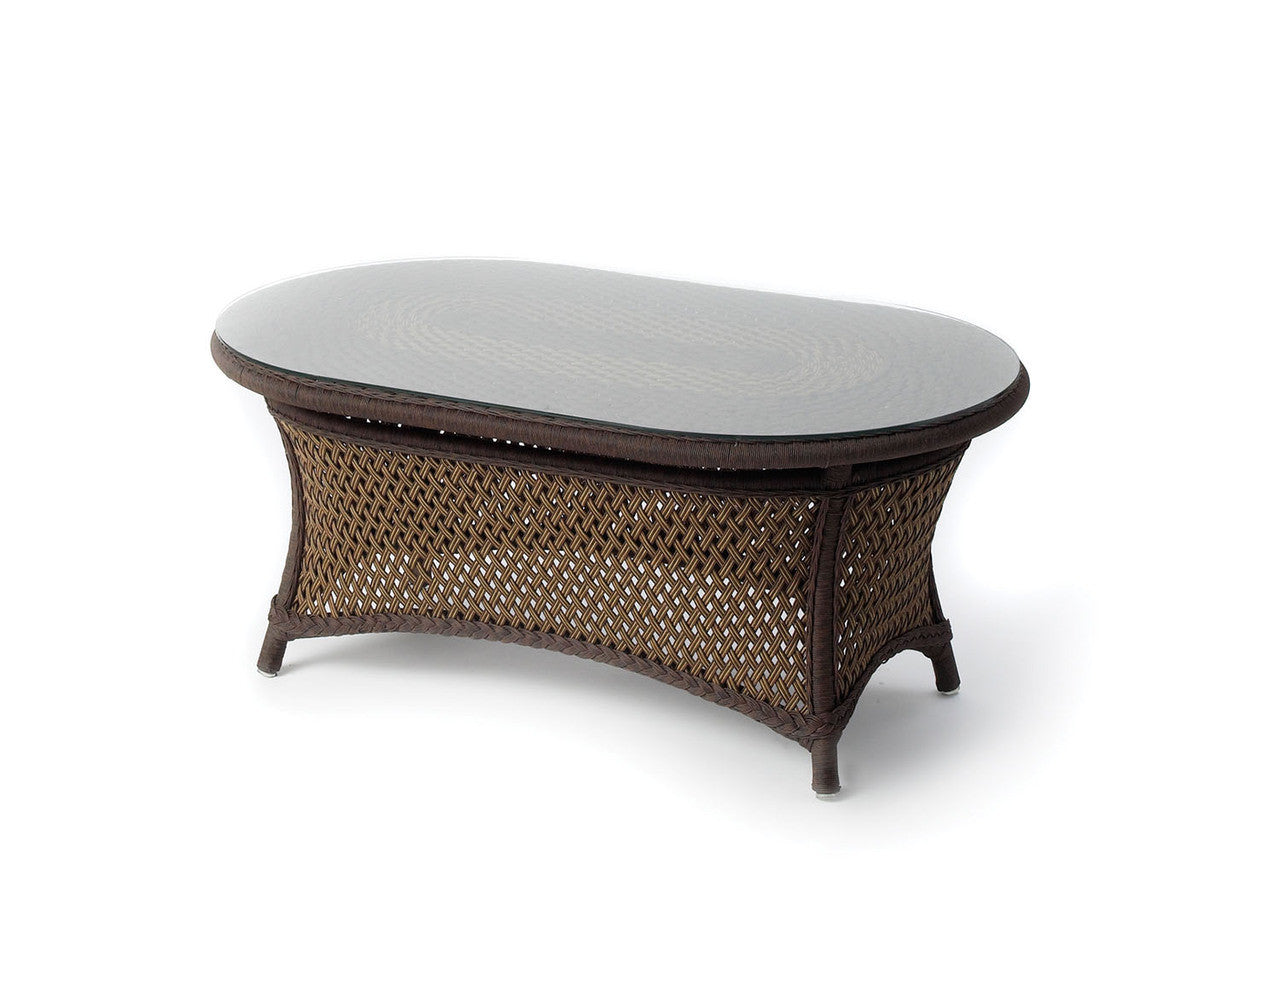 Lloyd Flanders Grand Traverse 43" Oval Wicker Cocktail Table With Lay On Glass